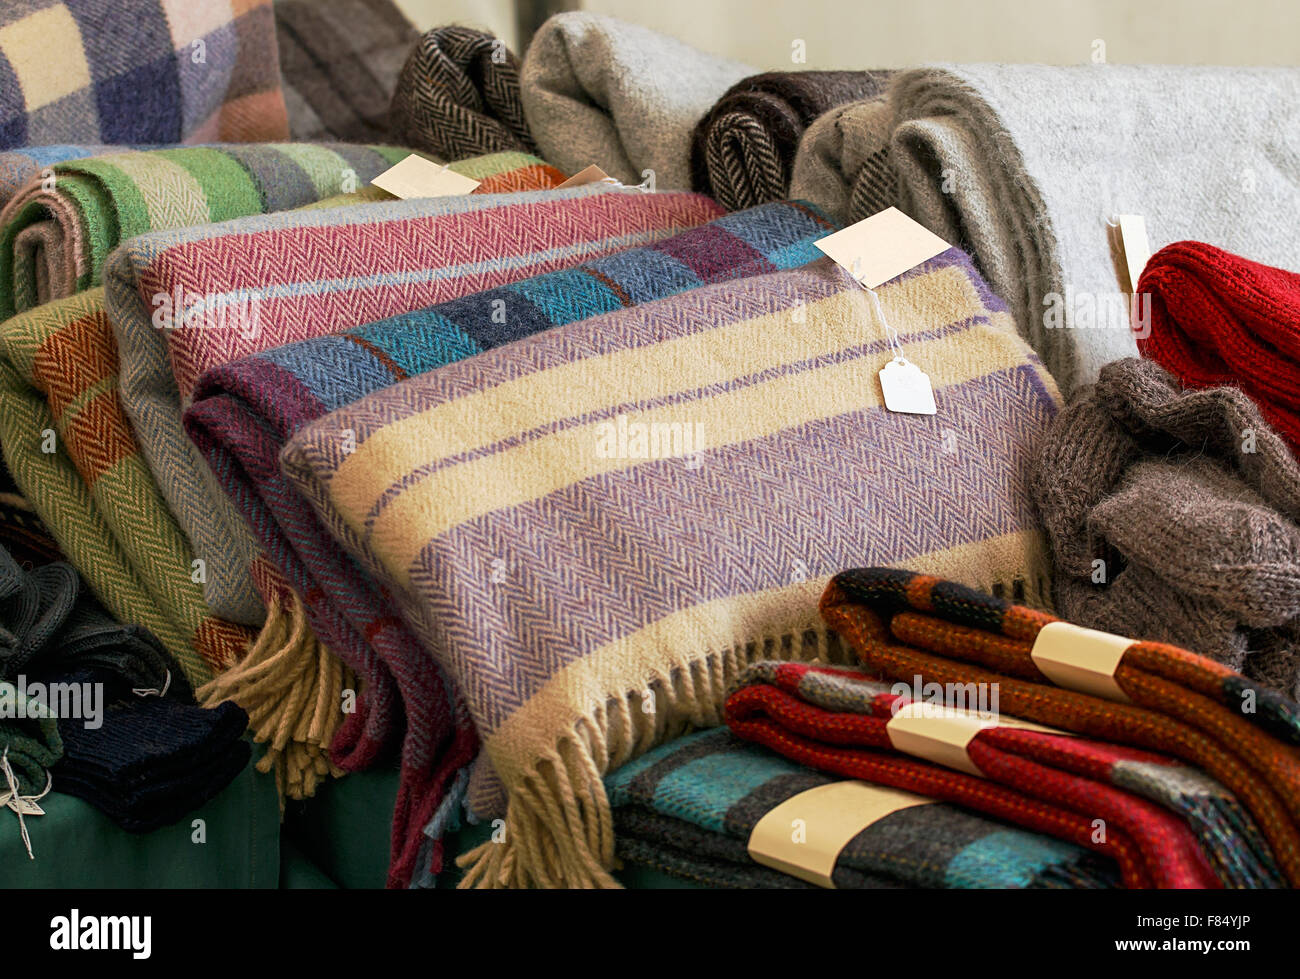 Selection of throws traditionally made of wool in a pile for sale at market traders, great example of crafting industry. Stock Photo